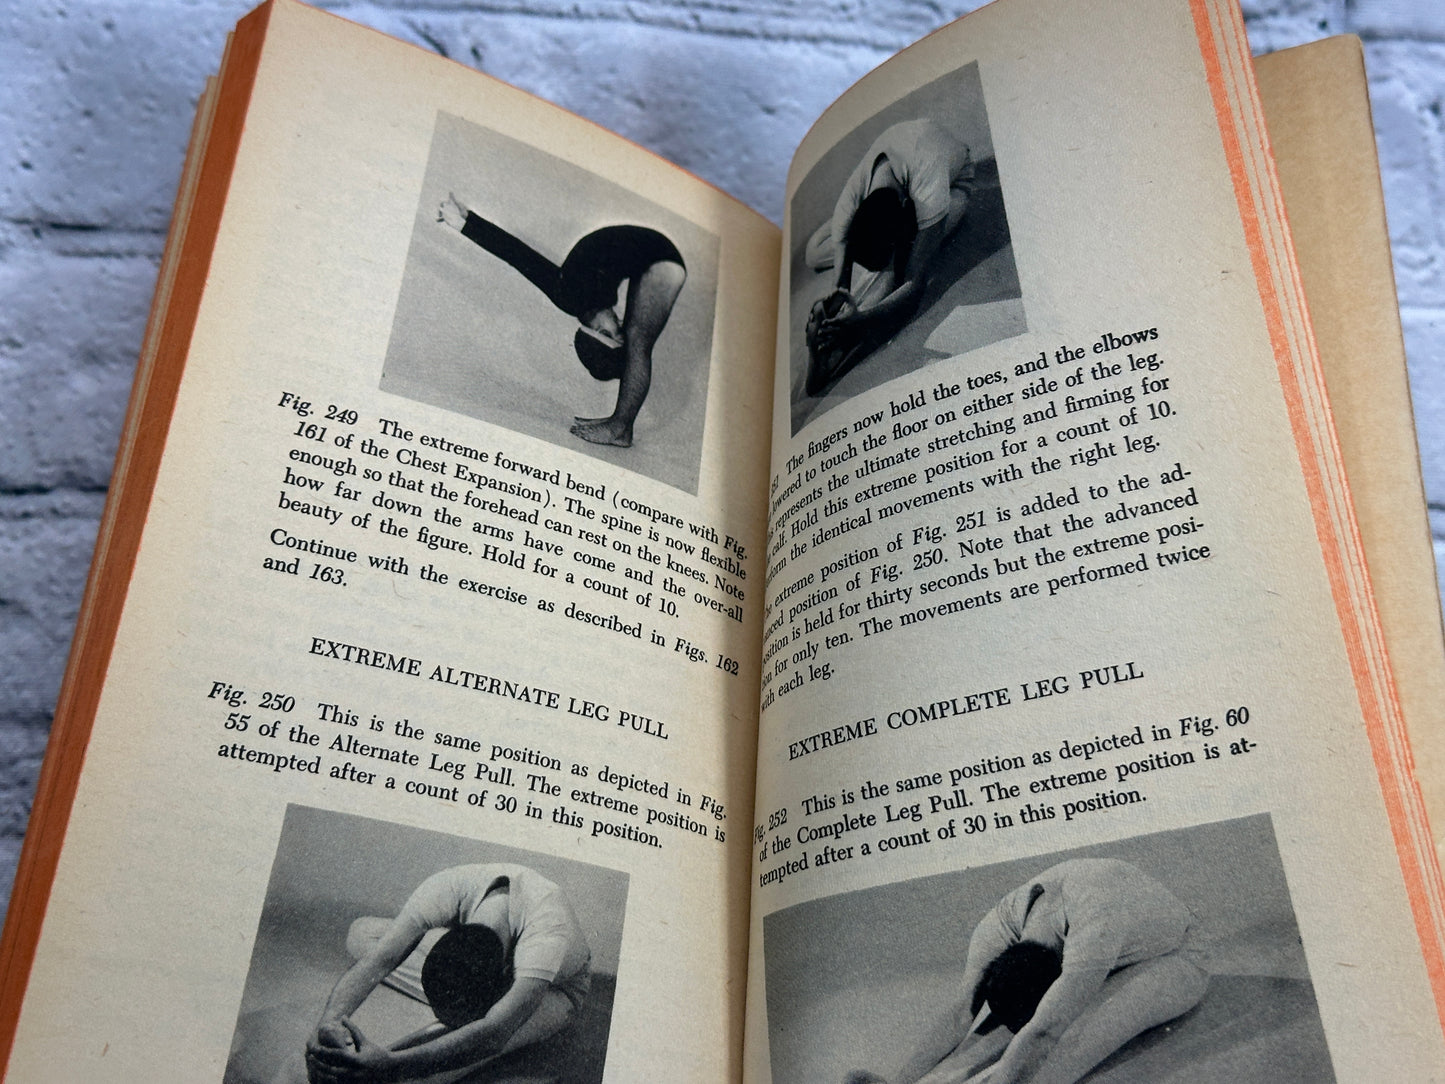 Yoga: For Physical Fitness by Richard Hittleman [1968 · Second Printing]